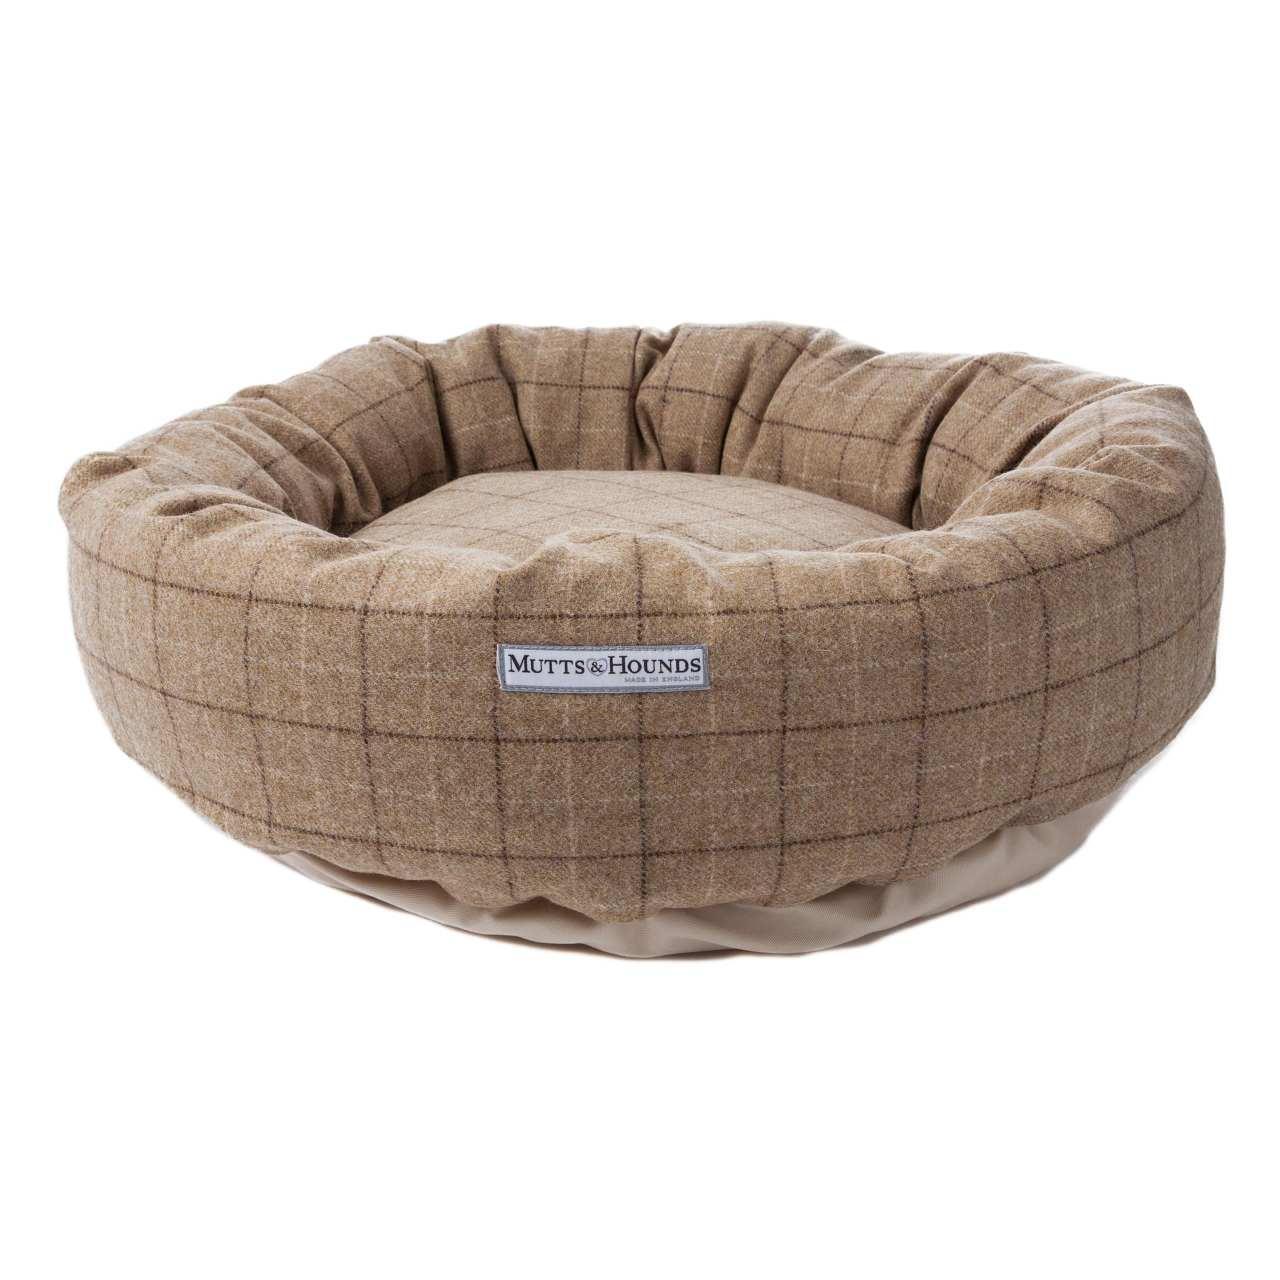 An image of Mutts & Hounds Oatmeal Tweed Donut Bed Large